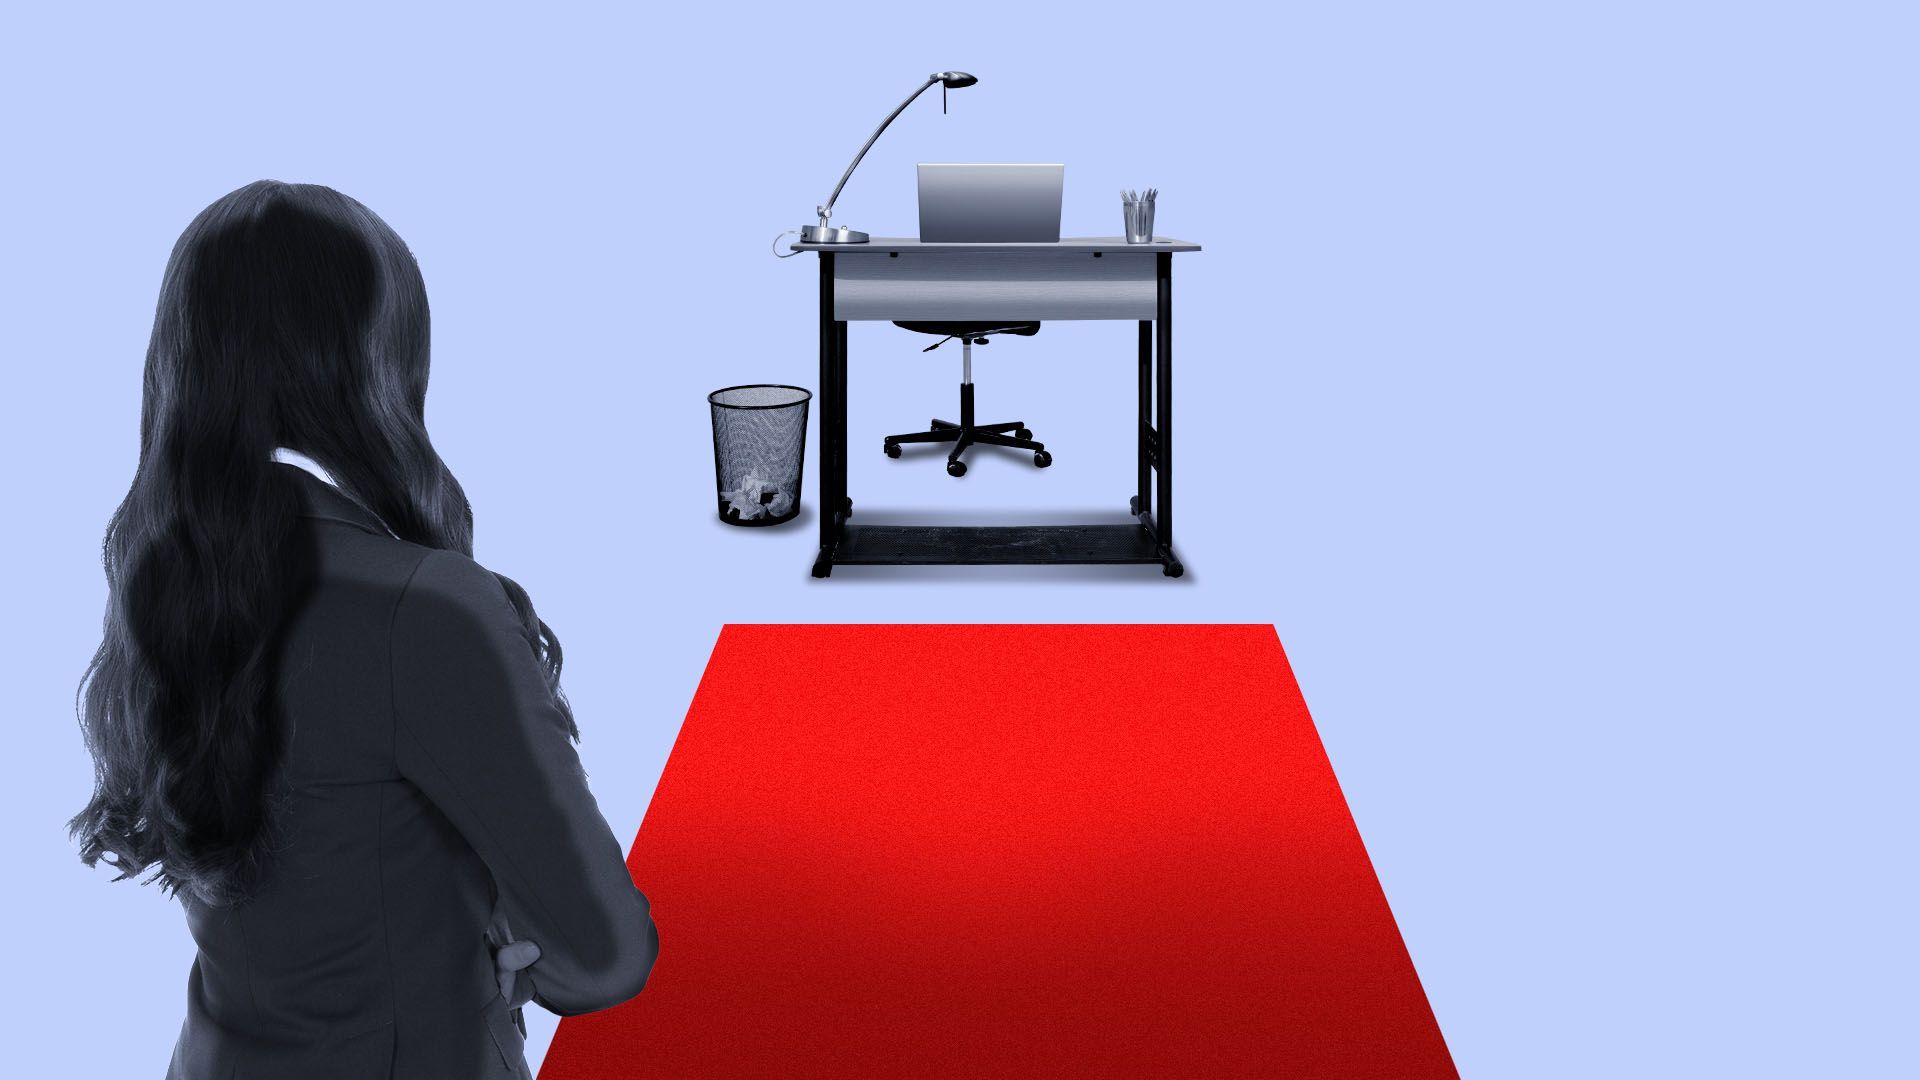 Illustration of a woman from behind looking at a red carpet leading to an empty office desk